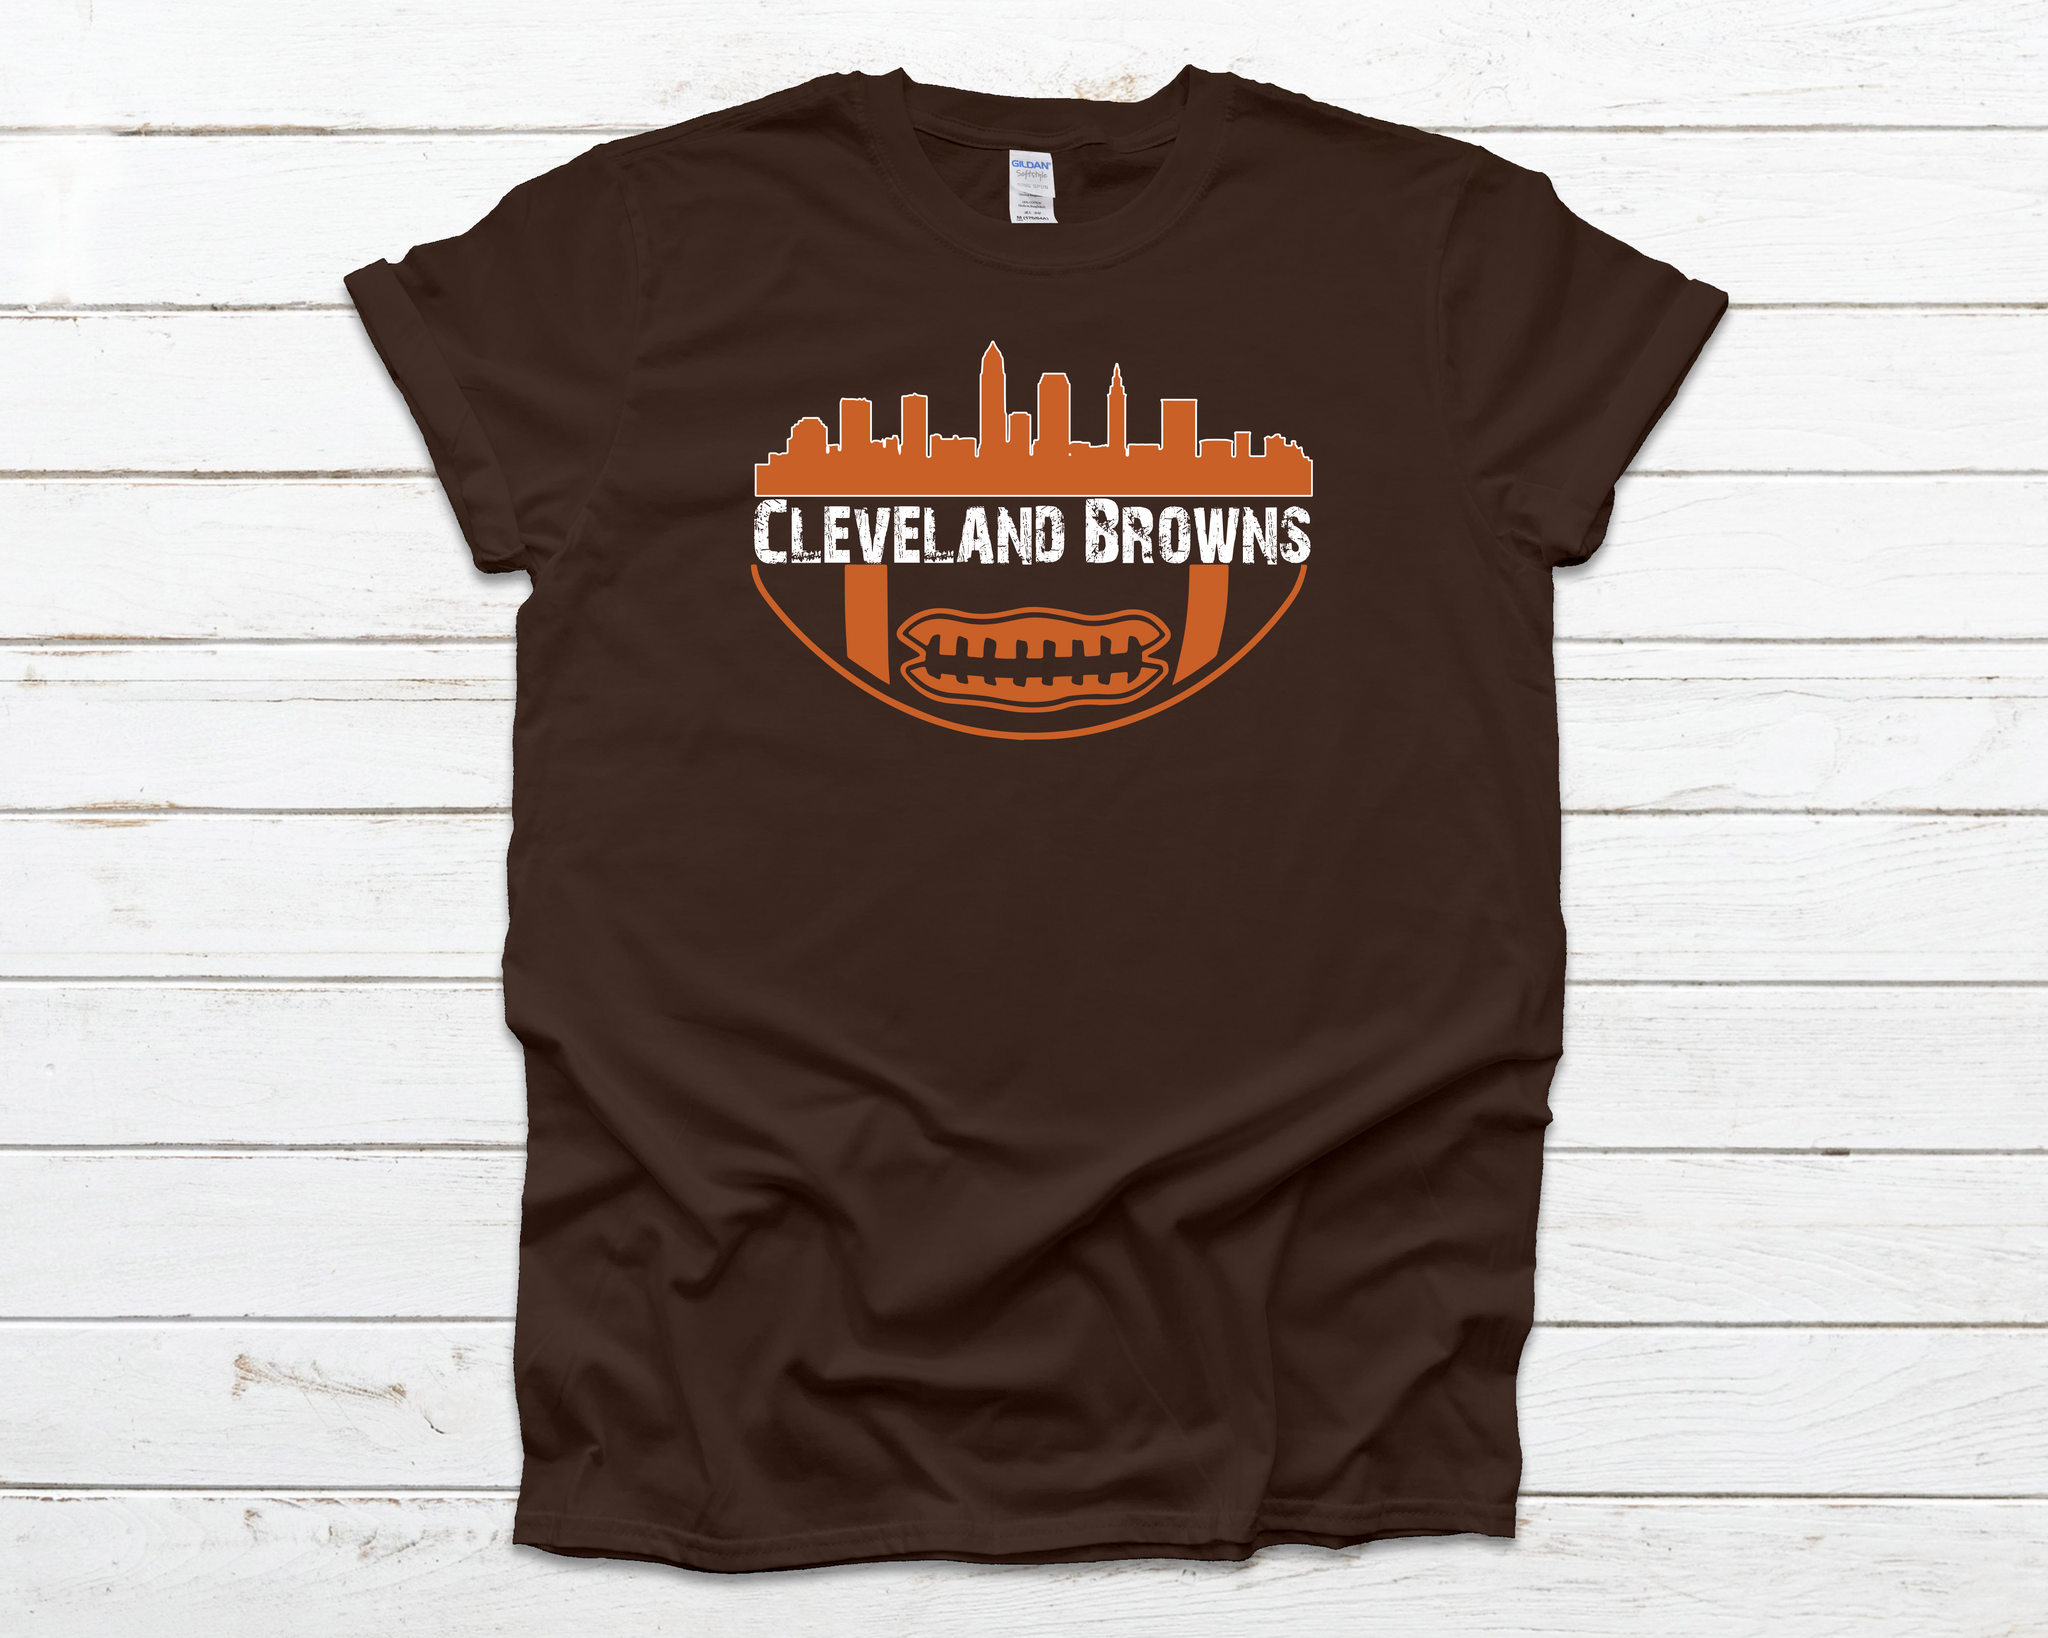 Cleveland Browns Graphic T-Shirt with Skyline Adult 2X-Large / Brown Shirt